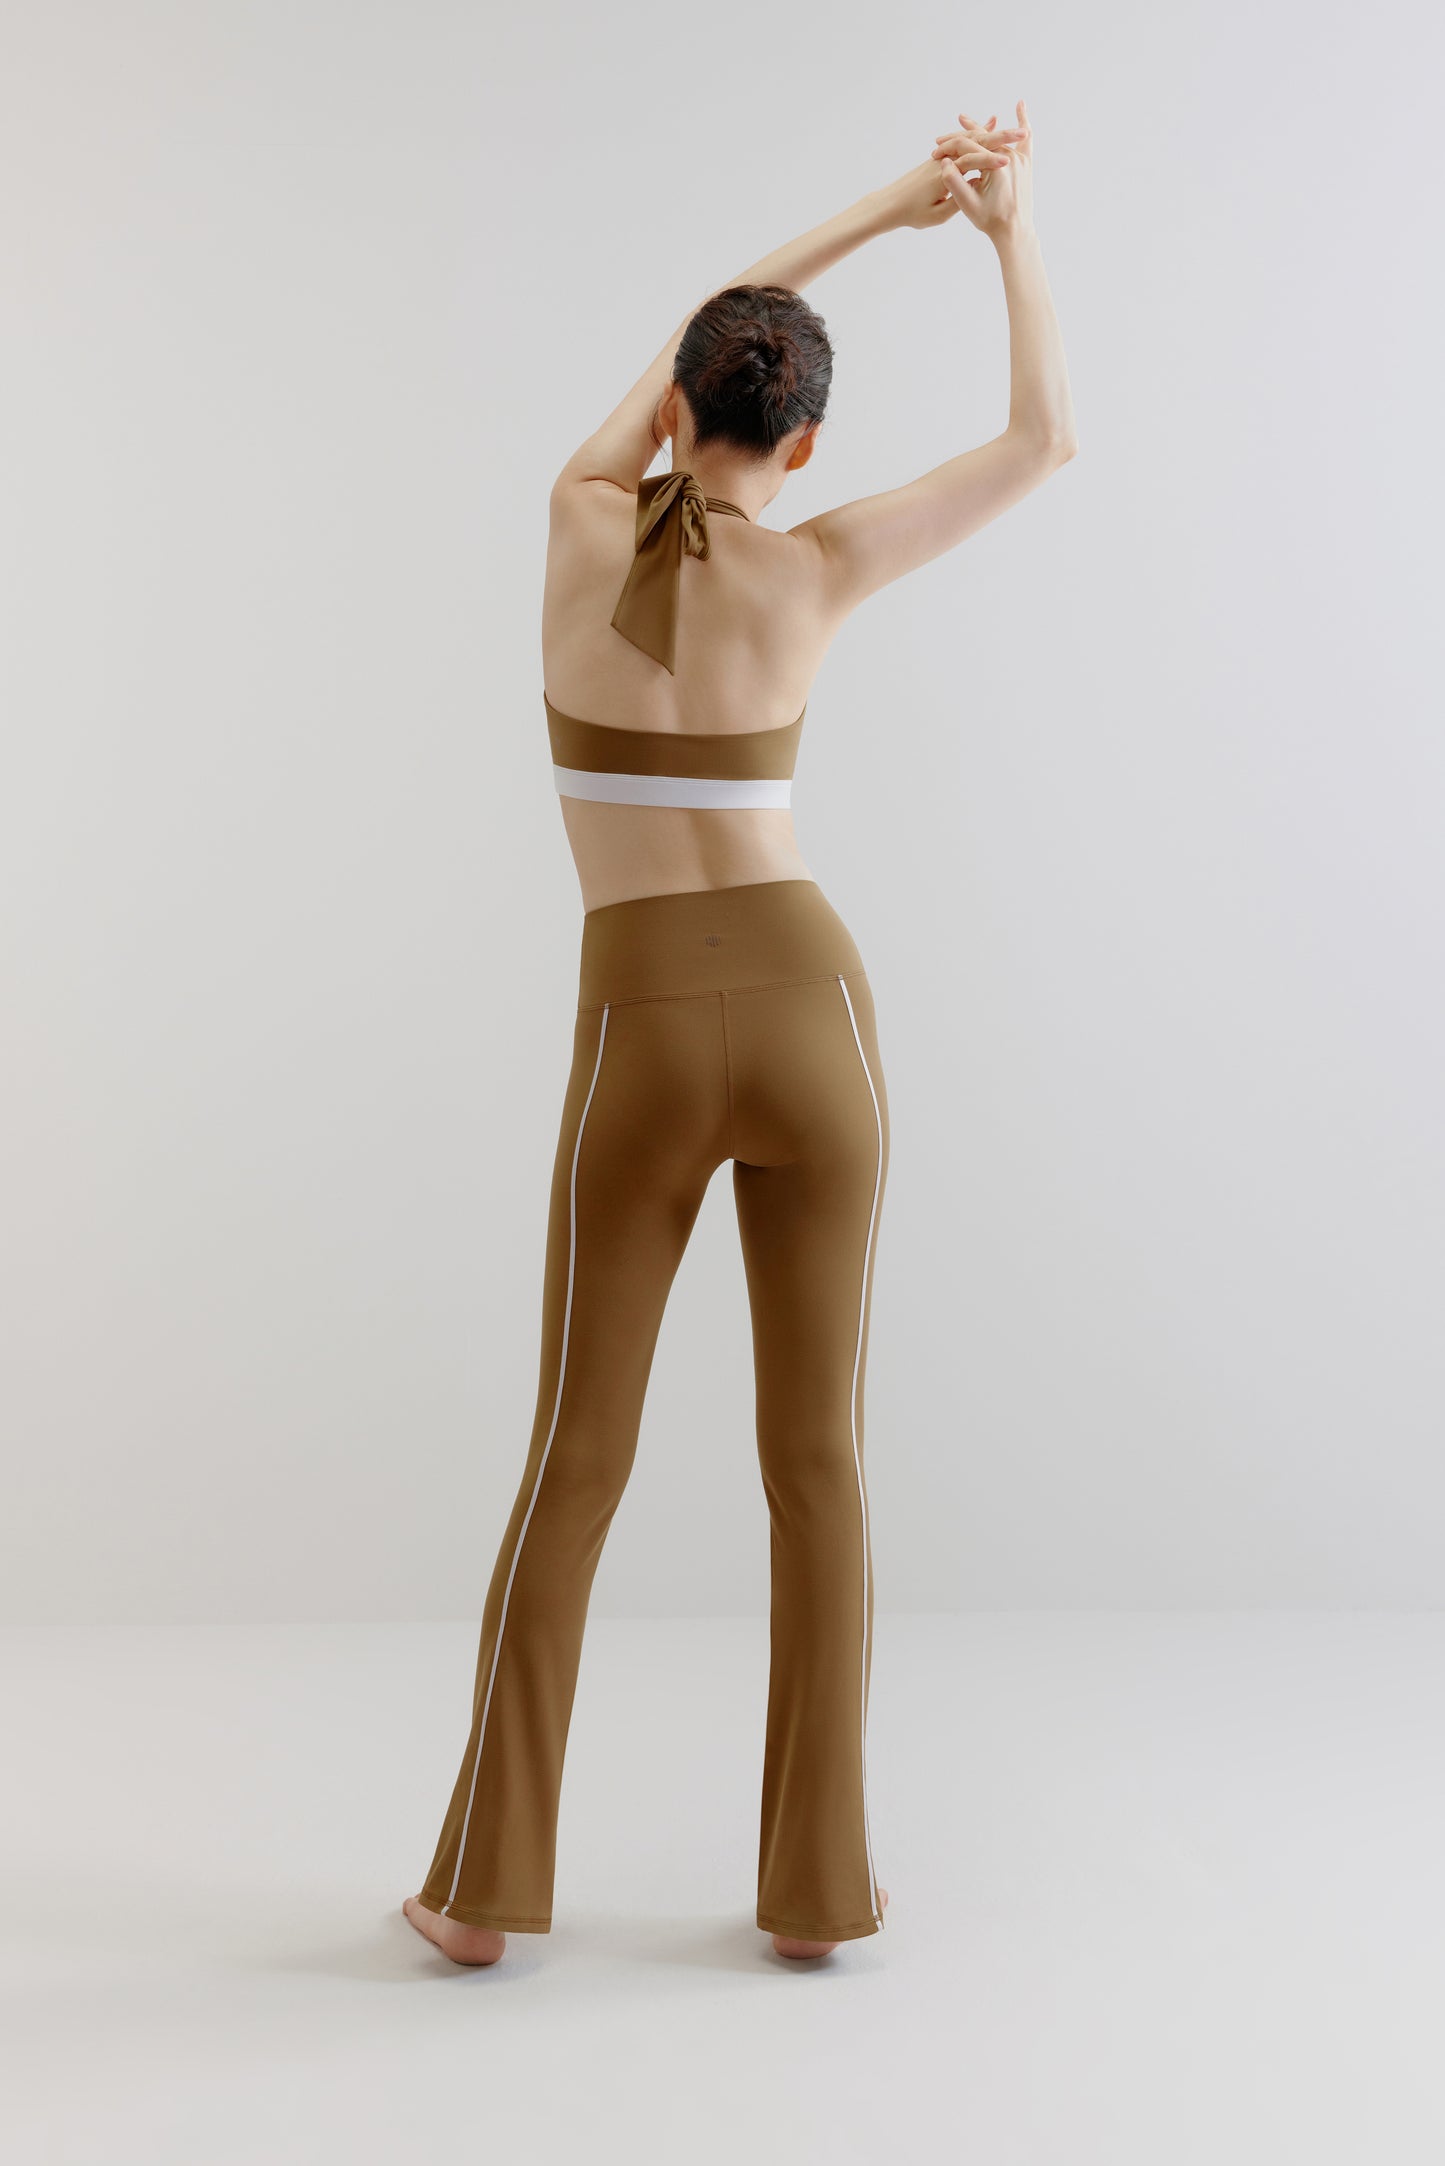 A woman wears an olive green sports bra and pants from back